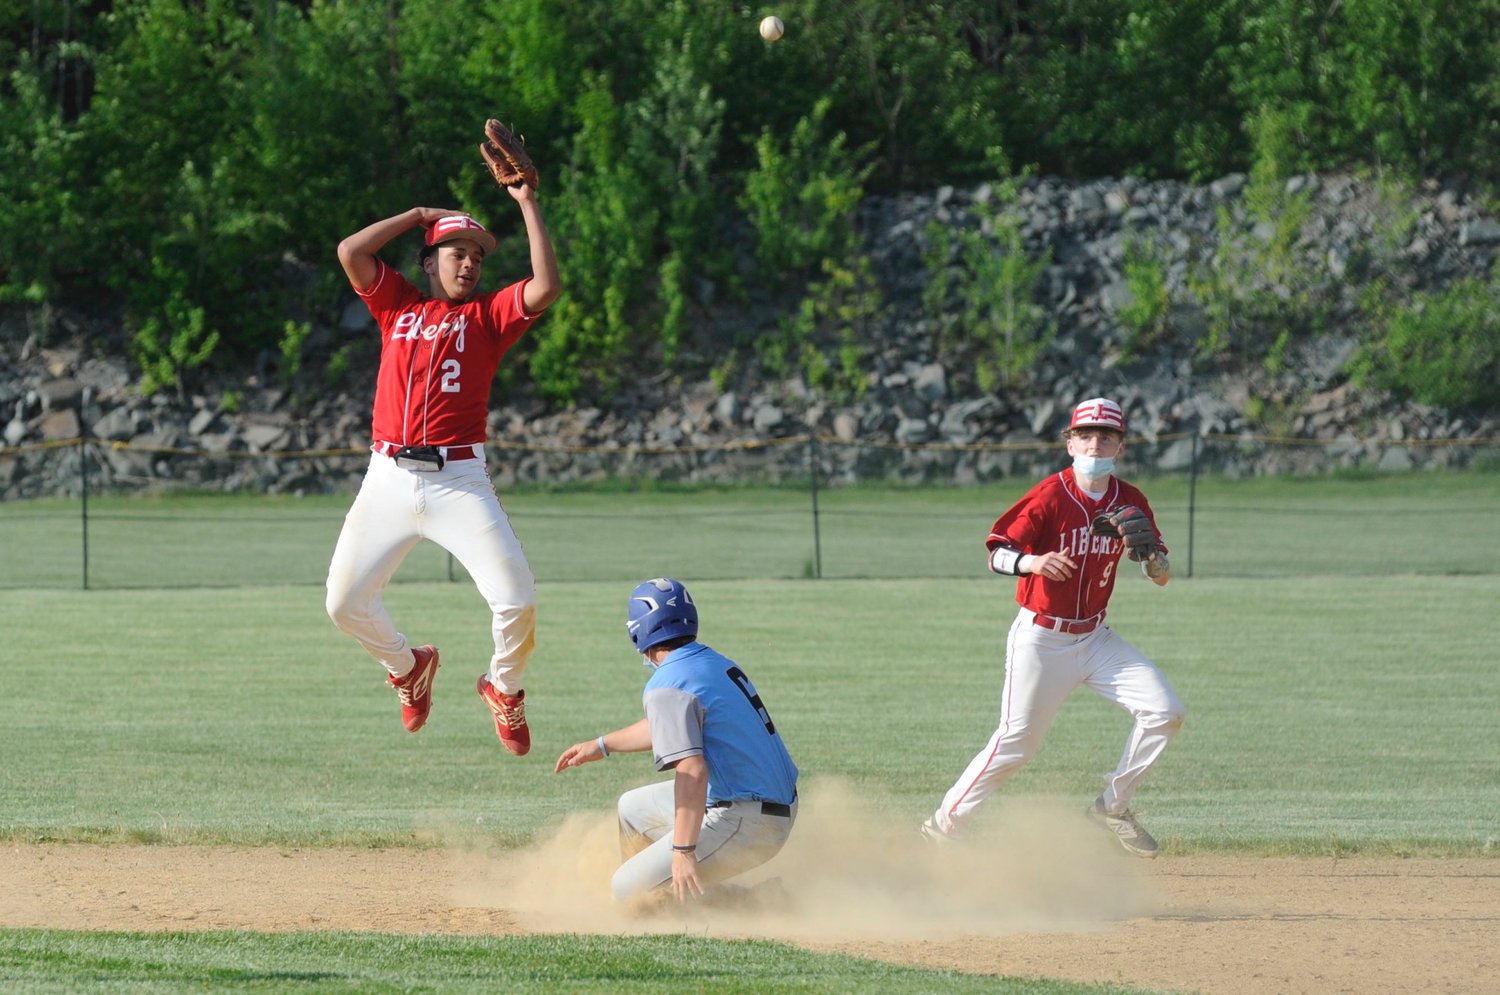 Aerobatics. Liberty’s Darlyn Jimenez gets some air under his cleats while teammate Owen Siegel reacts to Sullivan West’s Gavin Hauschild safely sliding into second on an overthrow from third.